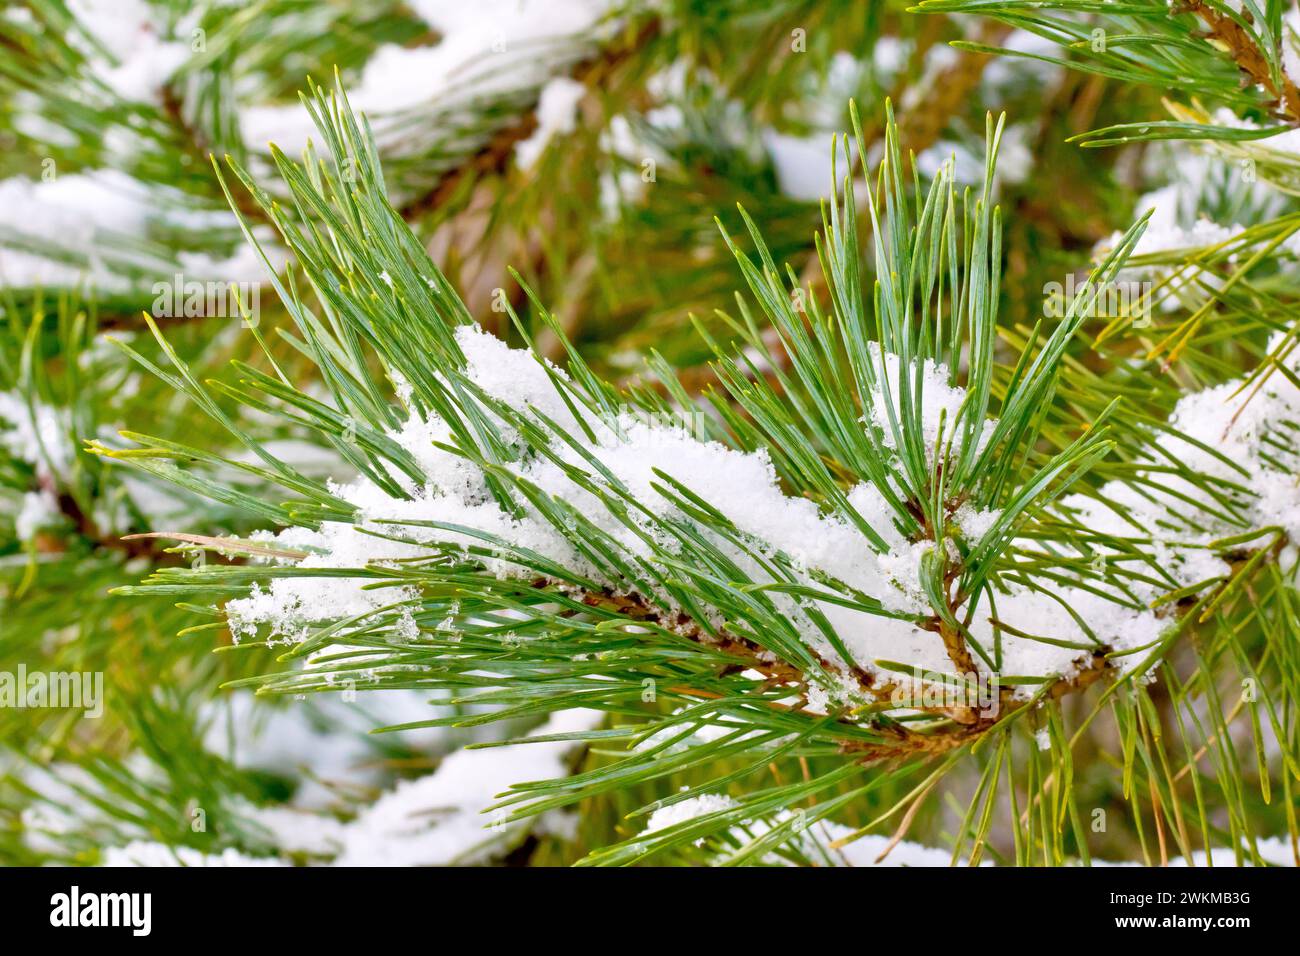 Scot's Pine (pinus sylvestris), close up of a branch of the tree showing the green needles or foliage of the tree covered in snow. Stock Photo